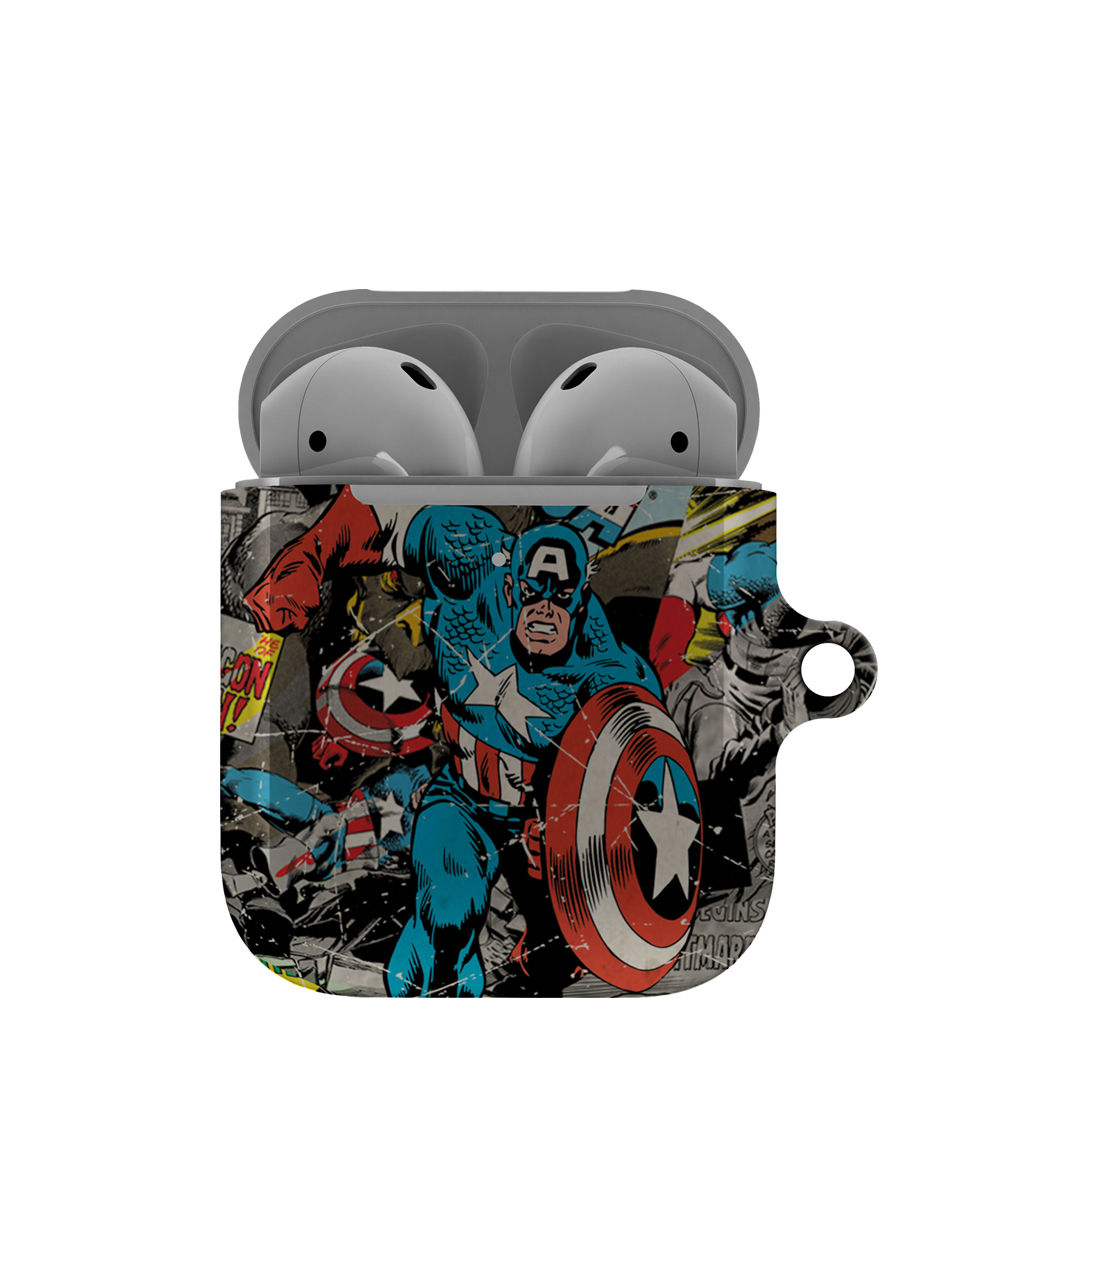 Buy Comic Captain America - Hard Shell Airpod Case (2nd Gen) Airpod Cases Online